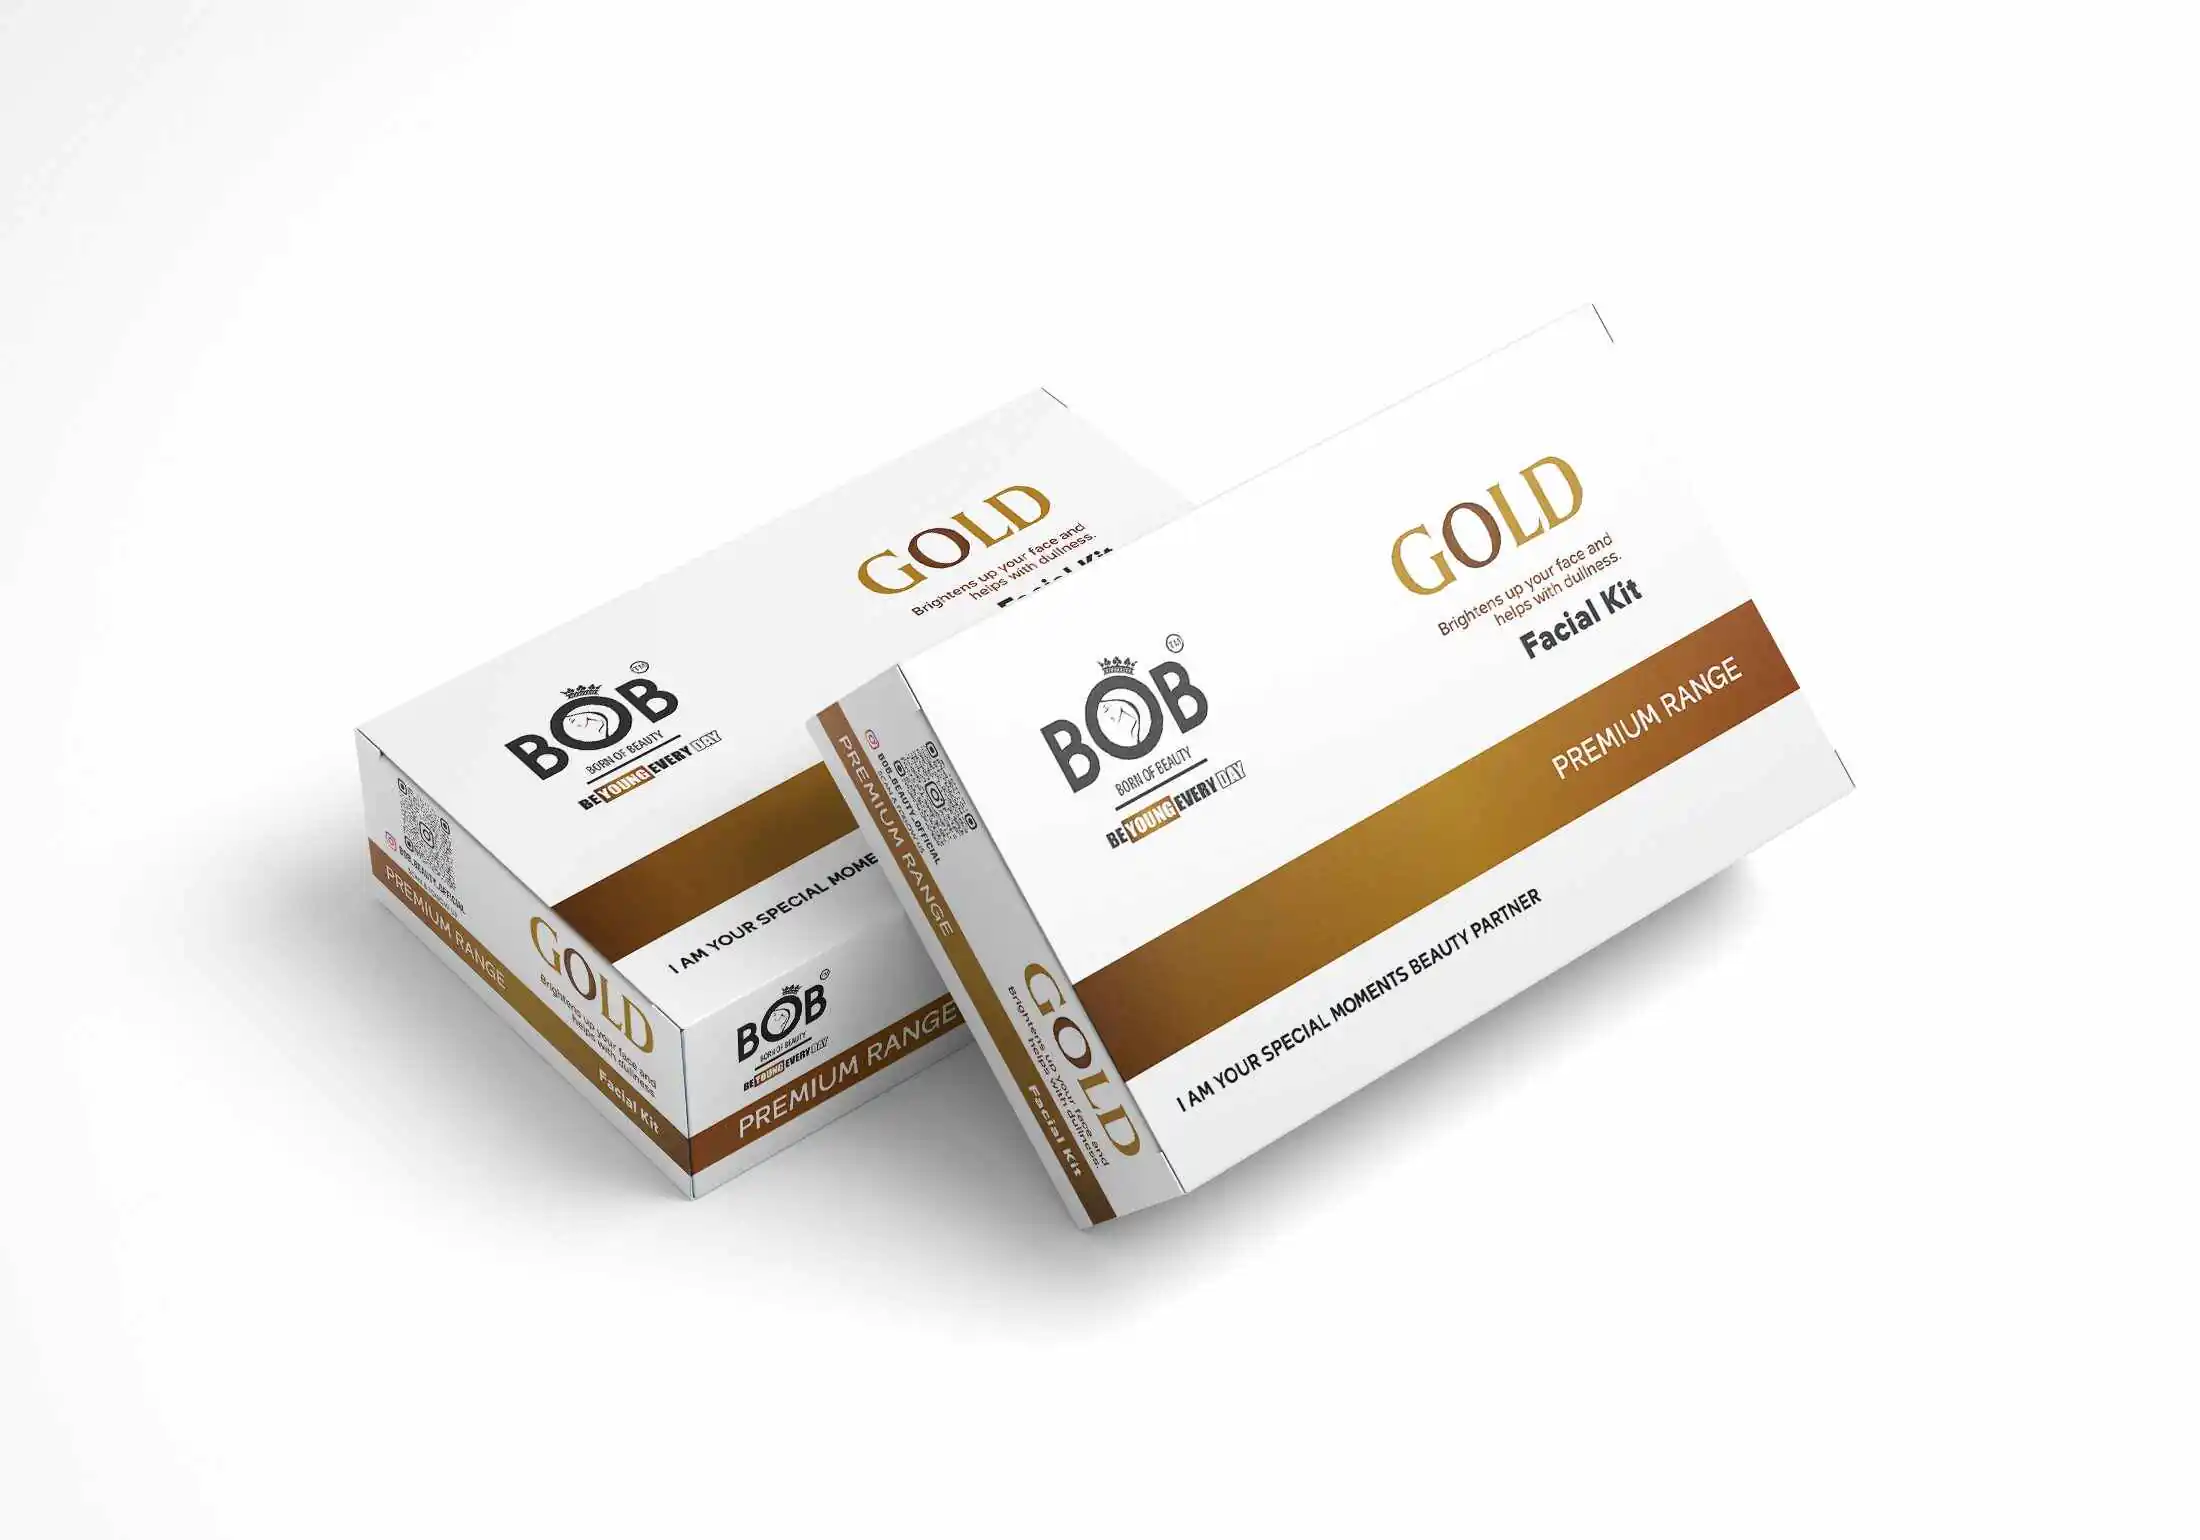 BOB Gold Facial Kit With Brightens Up Your Face & Helps With Dullness